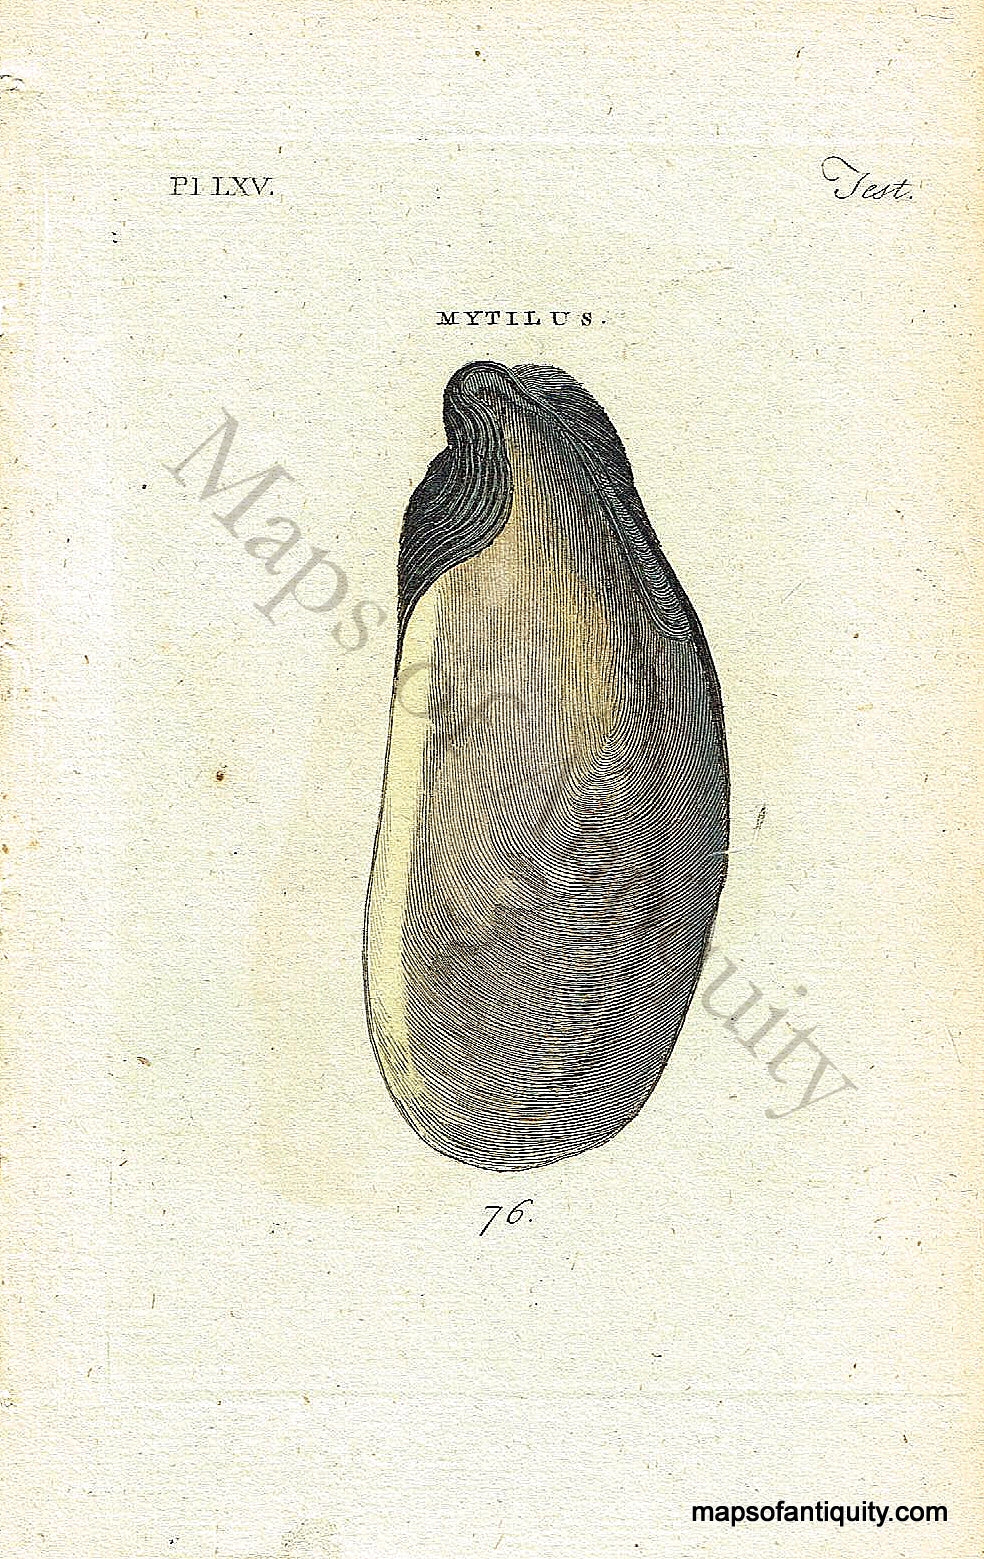 Antique-Hand-Colored-Engraved-Illustration-Mytilus-Shell-Mussel-Natural-History-Prints-Shells-c.-1760--Maps-Of-Antiquity